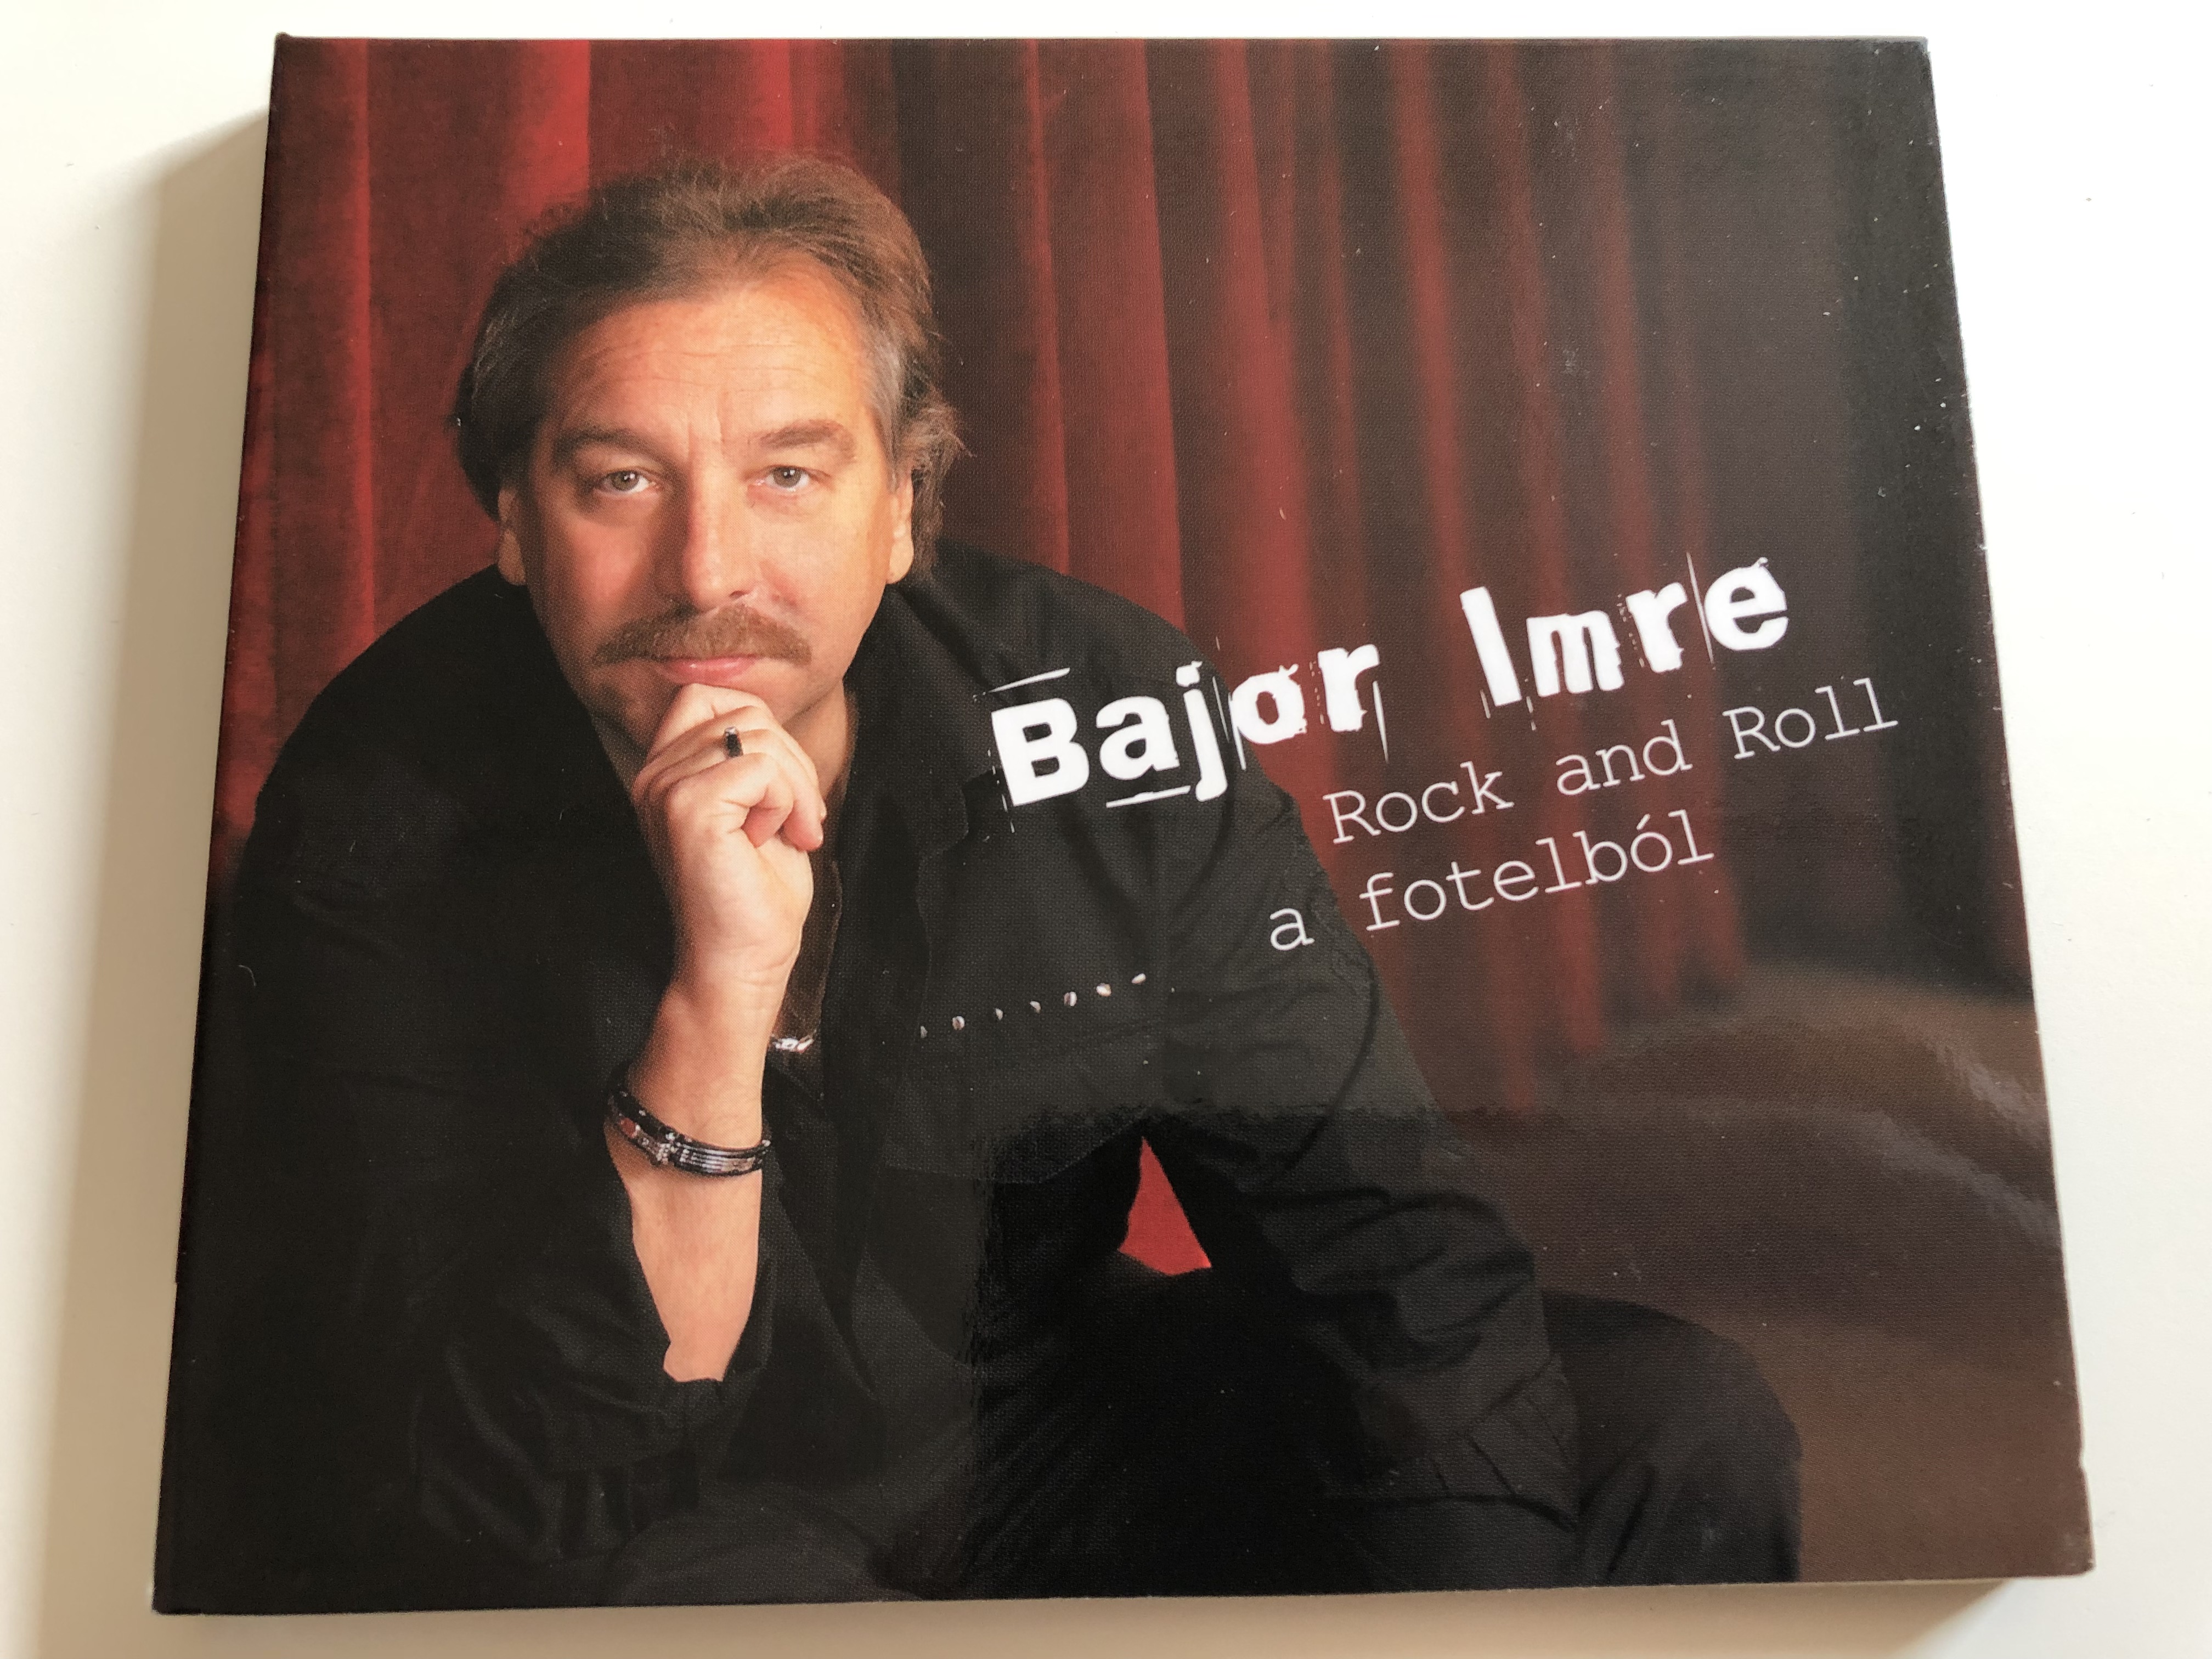 bajor-imre-rock-and-roll...a-fotelbo-limg-2224.jpg